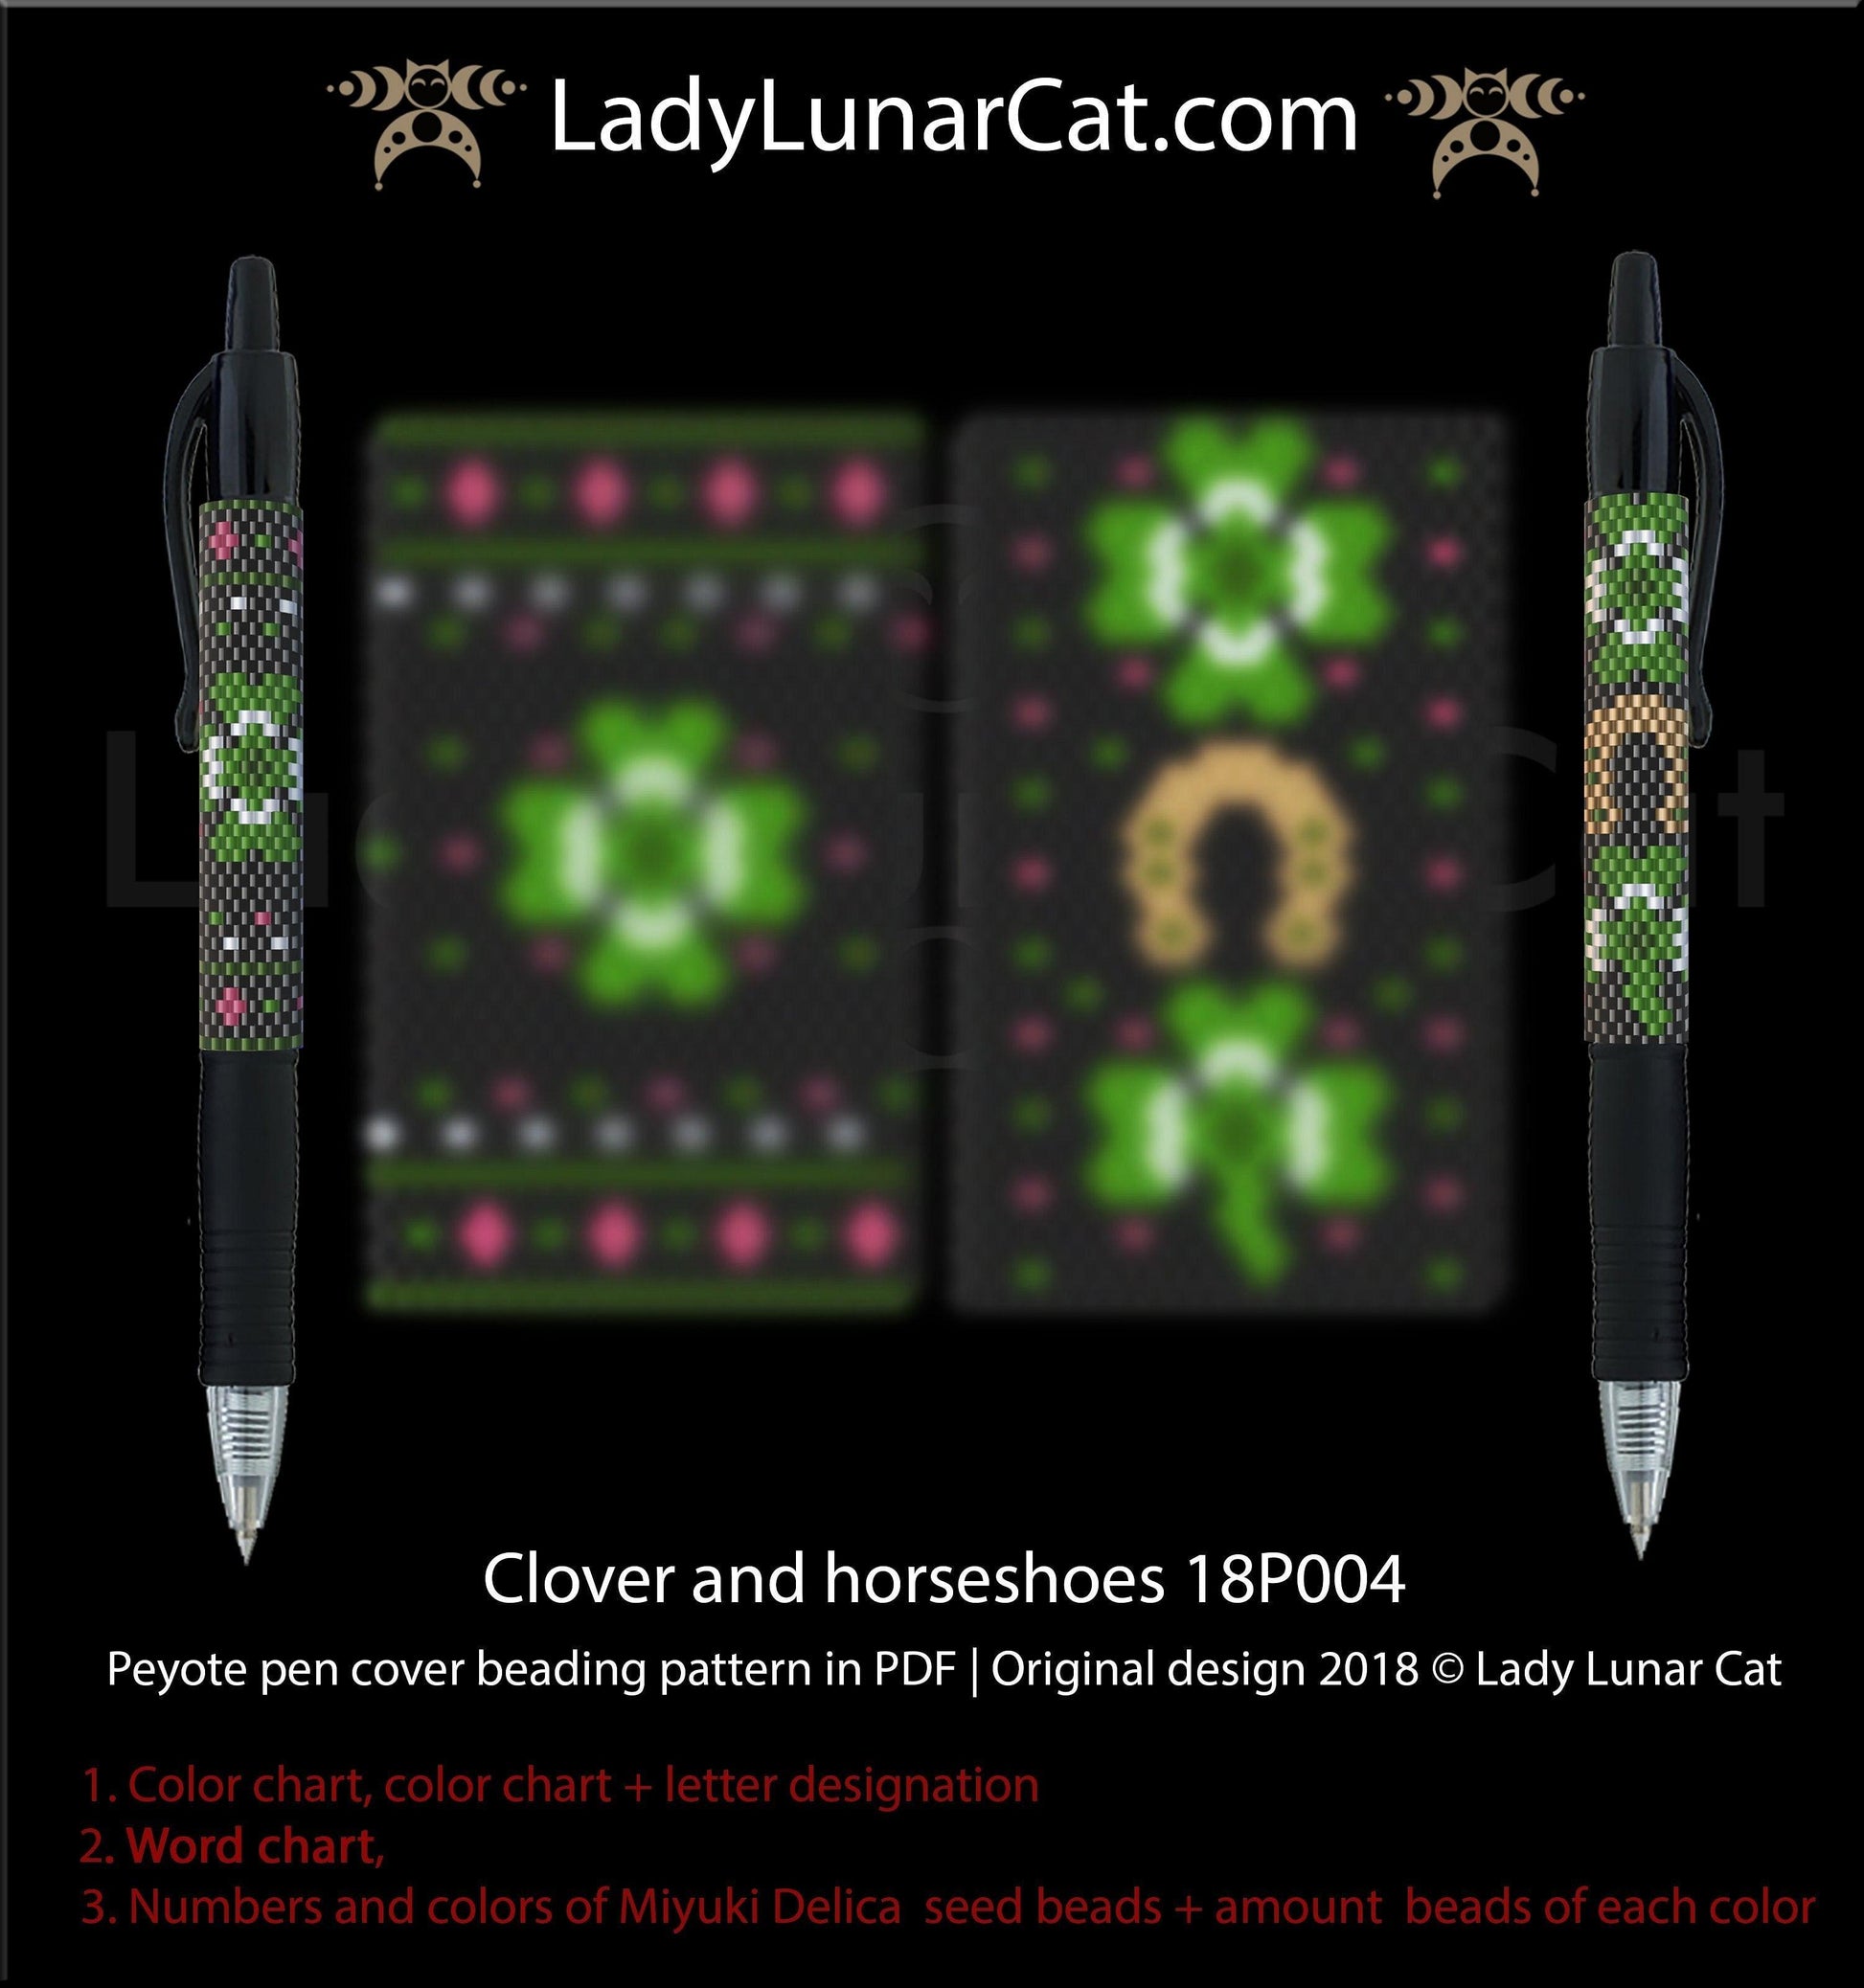 Copy of Peyote pen cover pattern for beading | Beaded pen wrap and rings tutorial Easter 18P006 LadyLunarCat